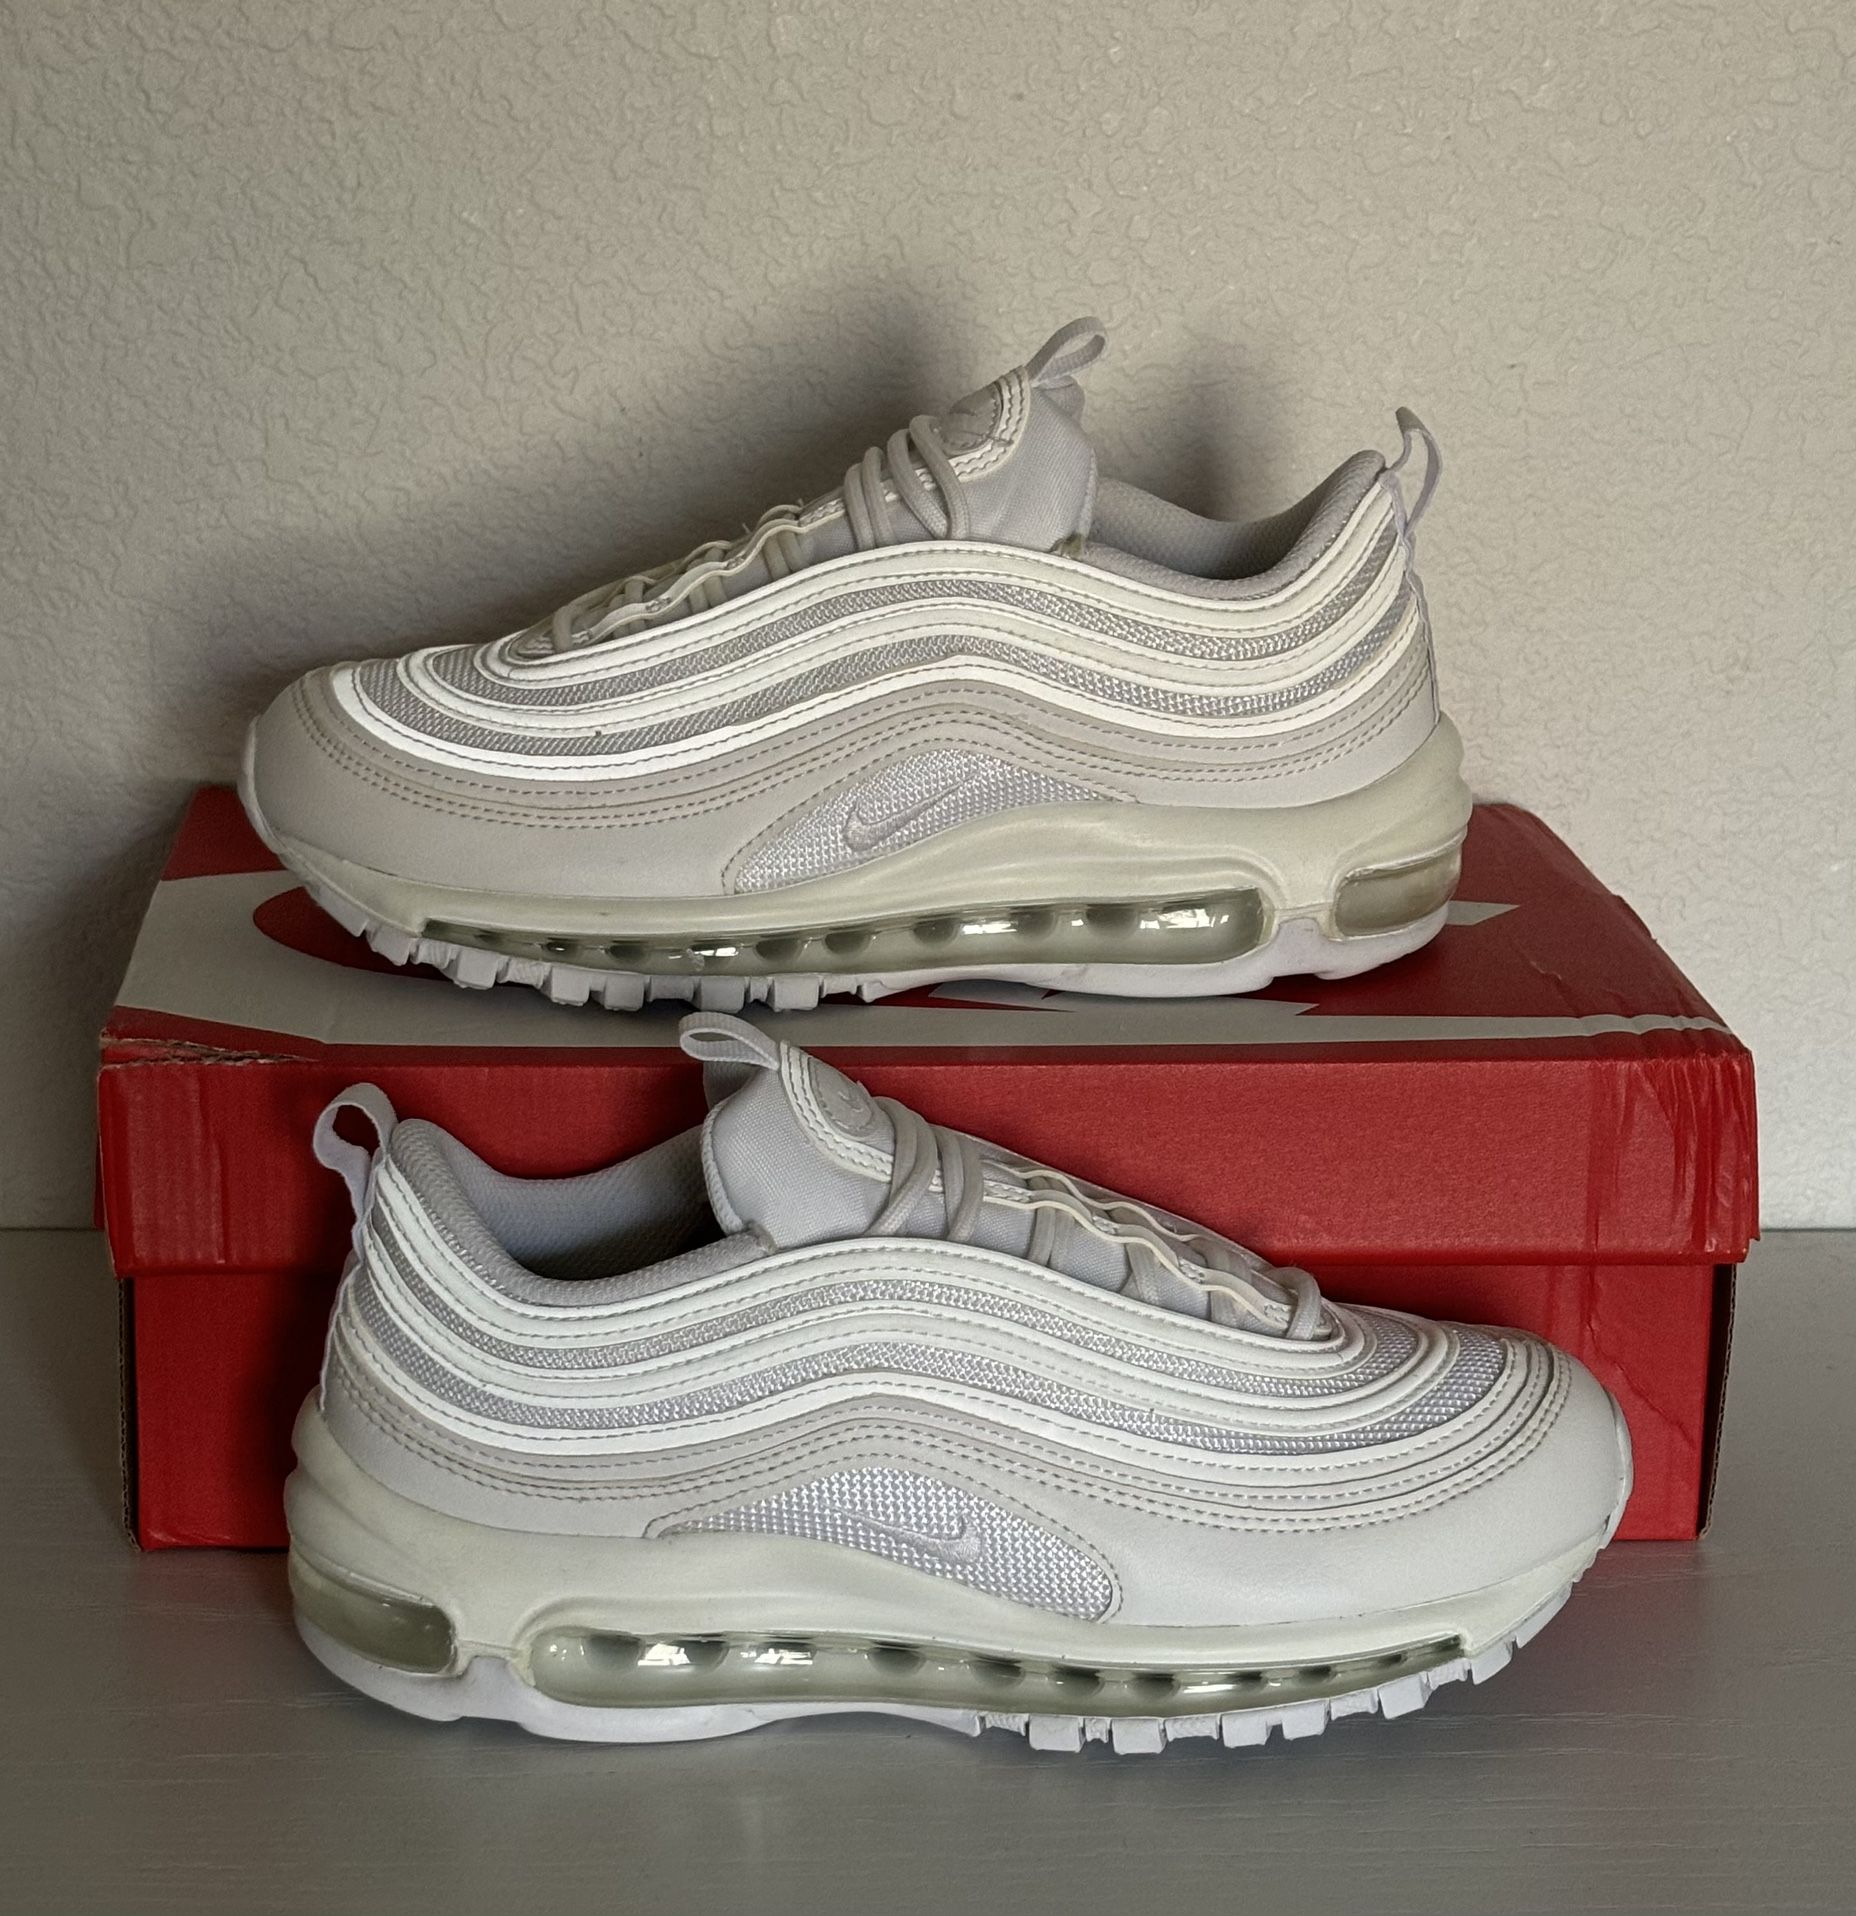 *NIKE* Nike Womens Air Max 97 Triple White Running Shoes Sneakers Size 8.